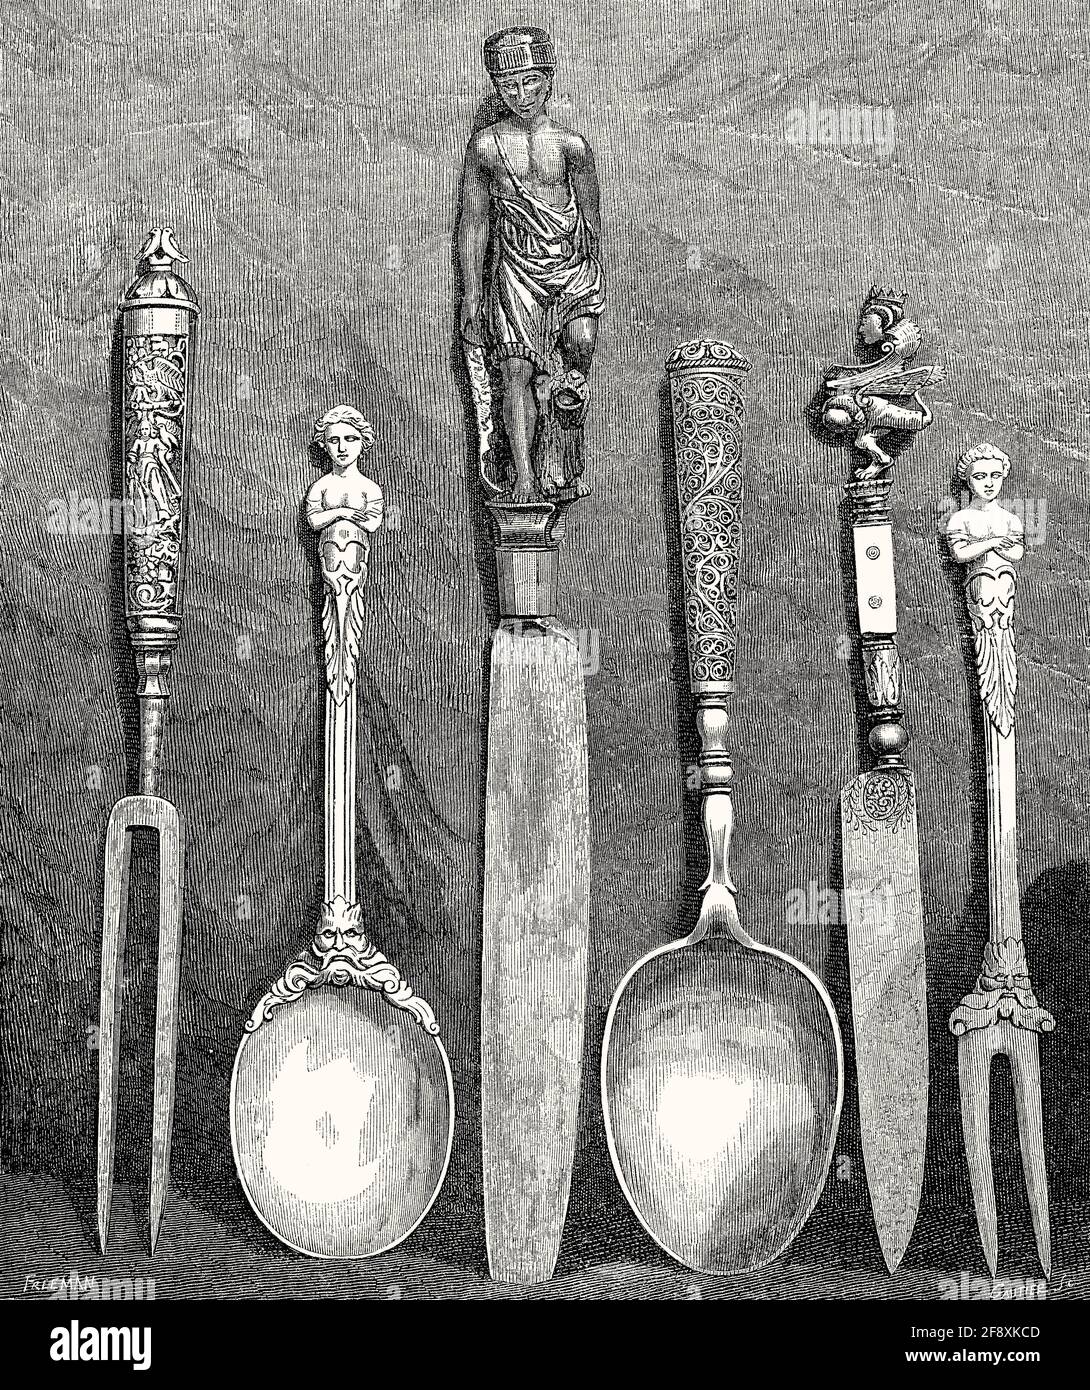 https://c8.alamy.com/comp/2F8XKCD/cutlery-16th-and-17th-century-2F8XKCD.jpg